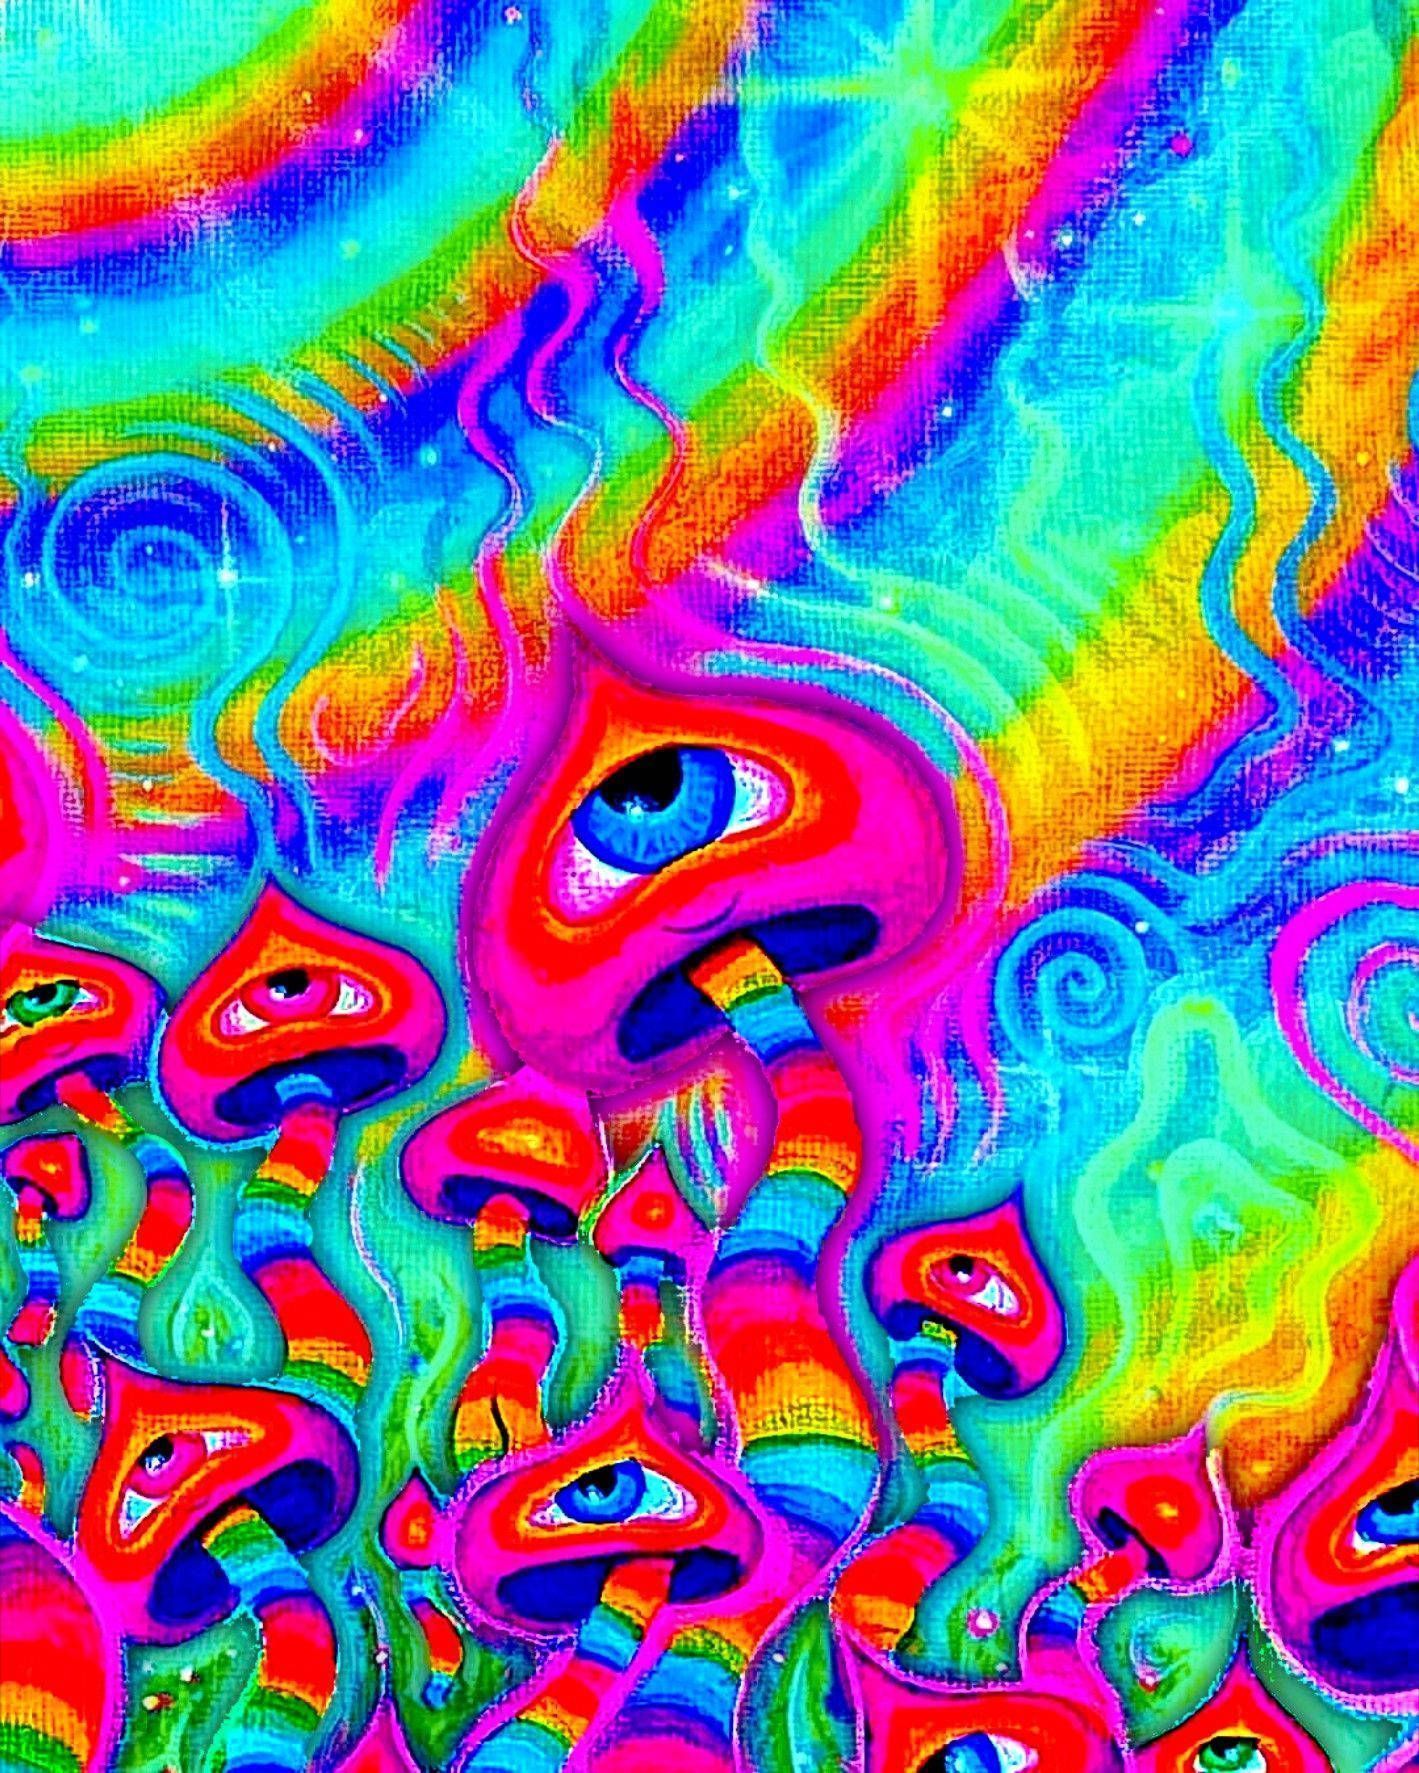 Download Visit Aesthetic Trippy and explore its visually stimulating world. Wallpaper